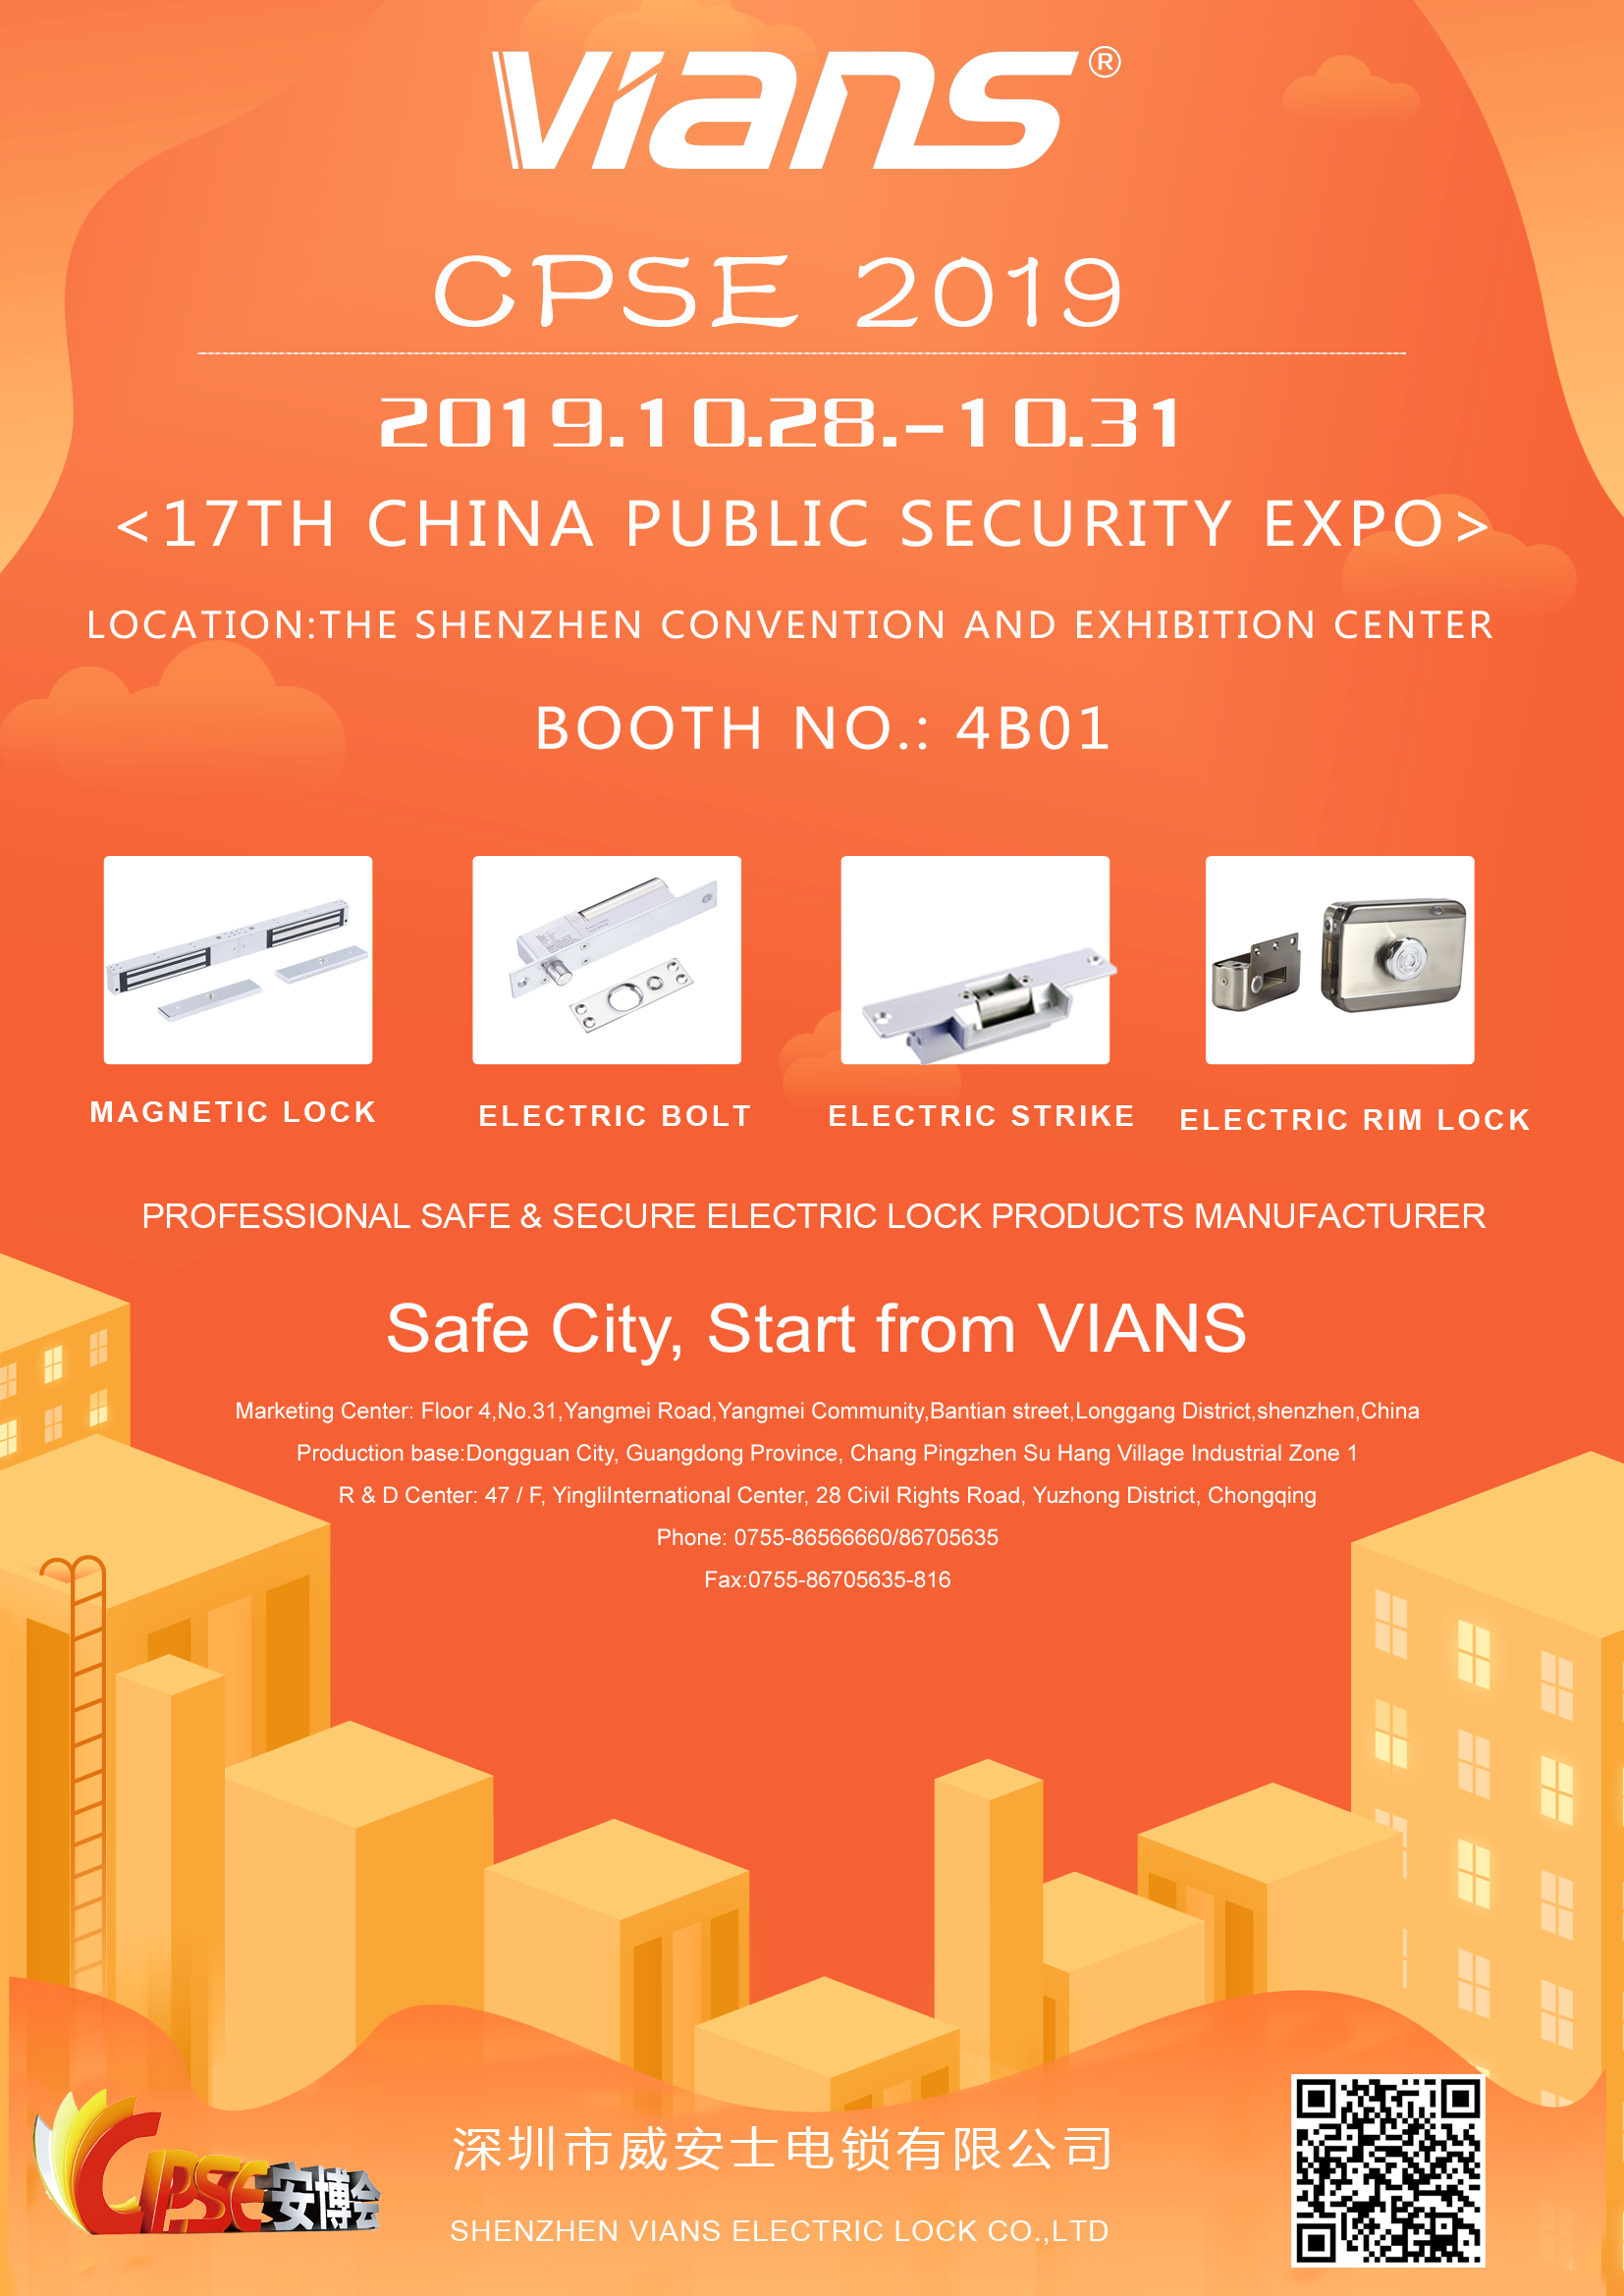 CPSE 2019-THE <17TH CHINA PUBLIC SECURITY EXPO>